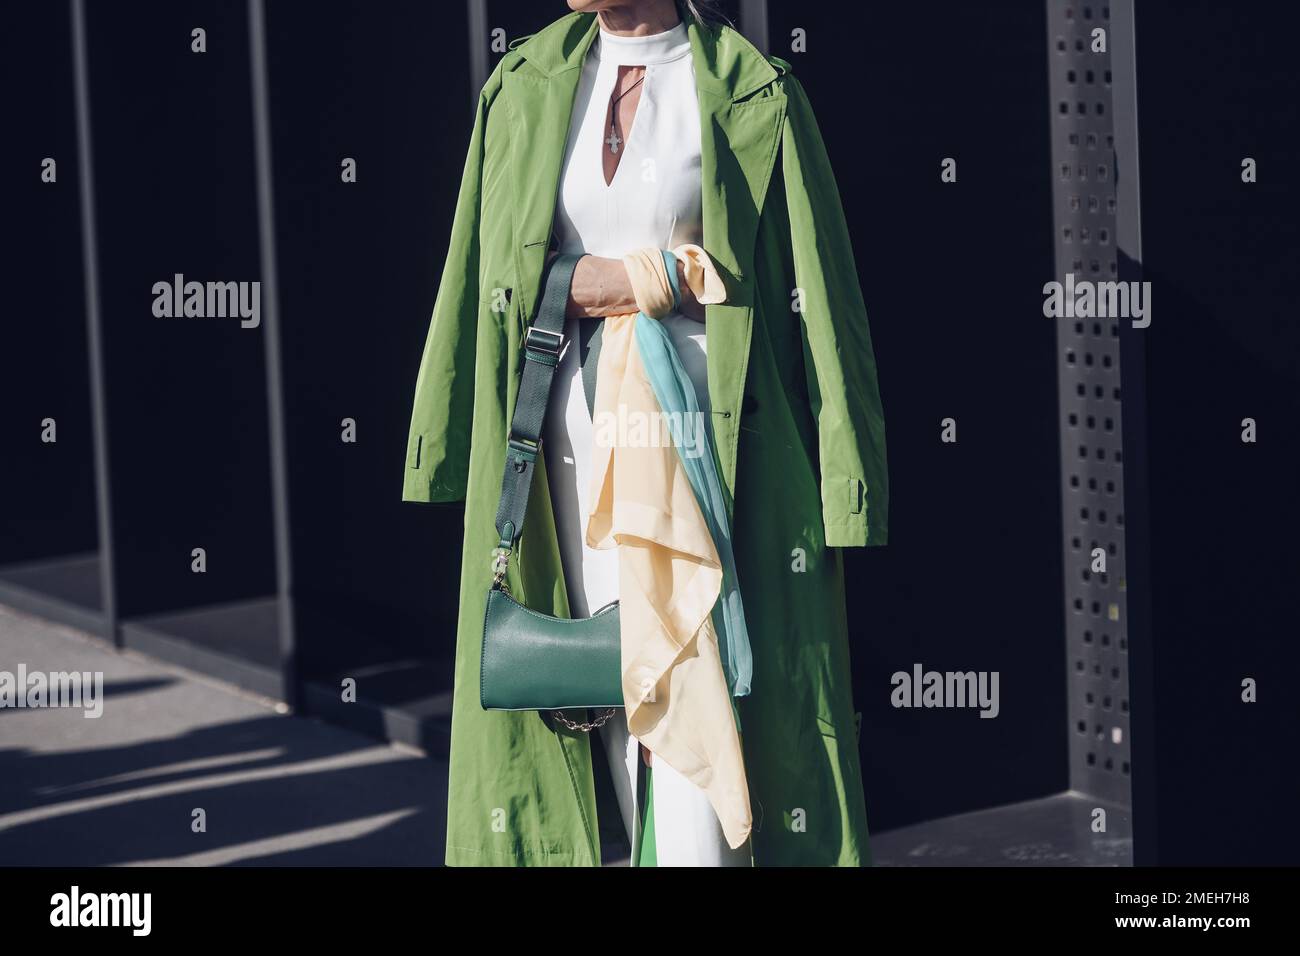 Milan, Italy - February 25, 2022: Female wearing a green coat, white dress, matching green bag and green high heels boots. Stock Photo